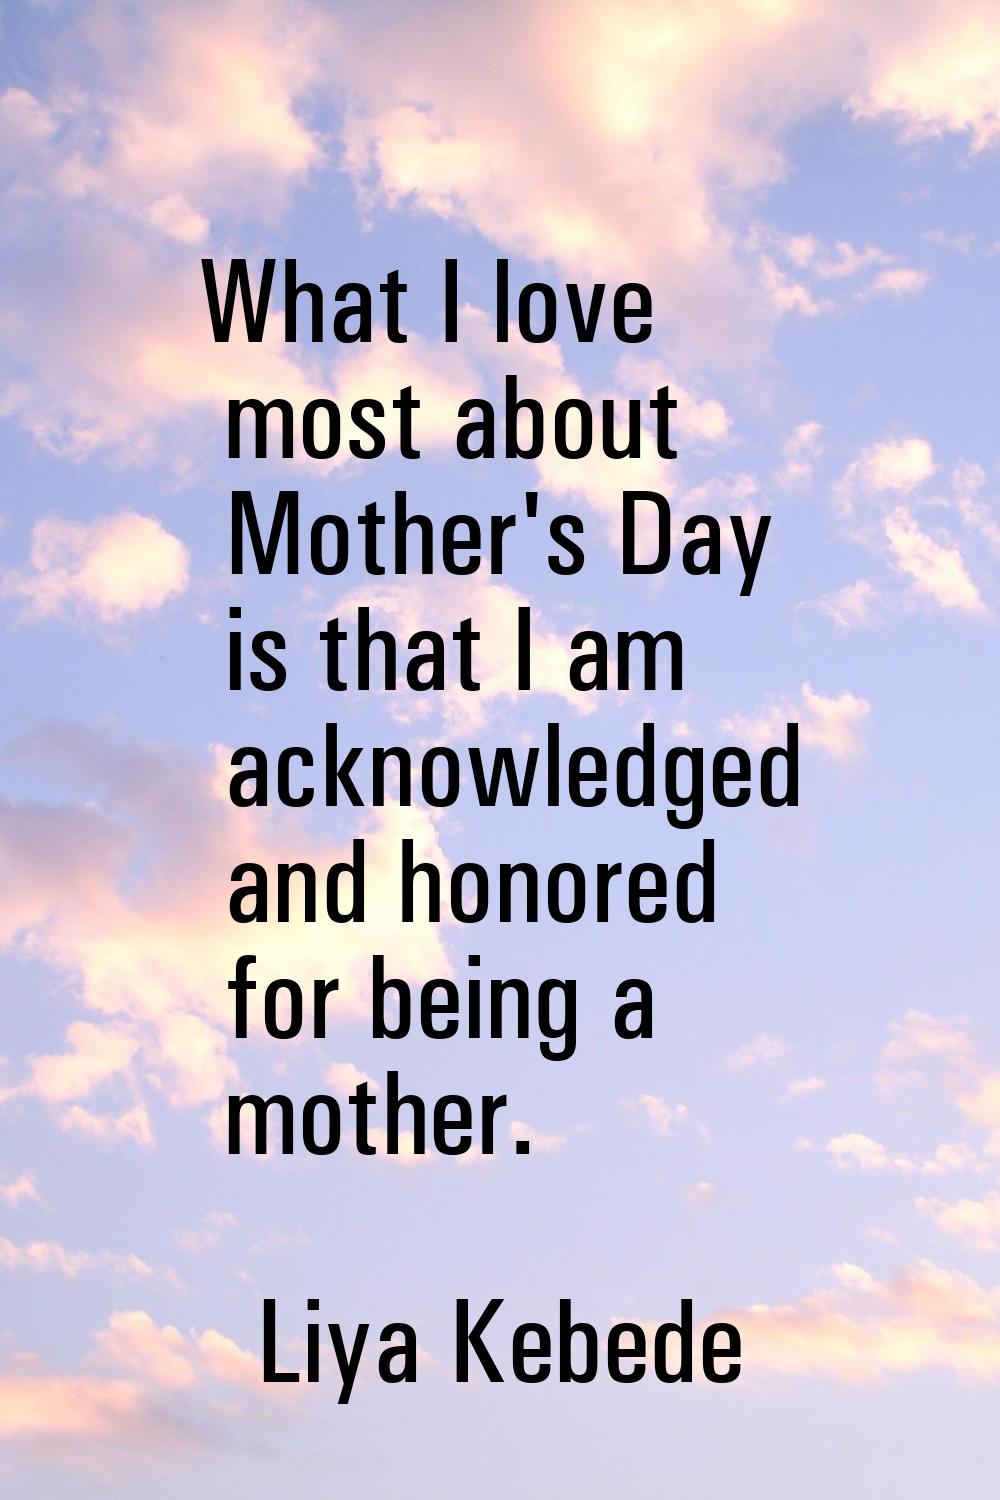 What I love most about Mother's Day is that I am acknowledged and honored for being a mother.